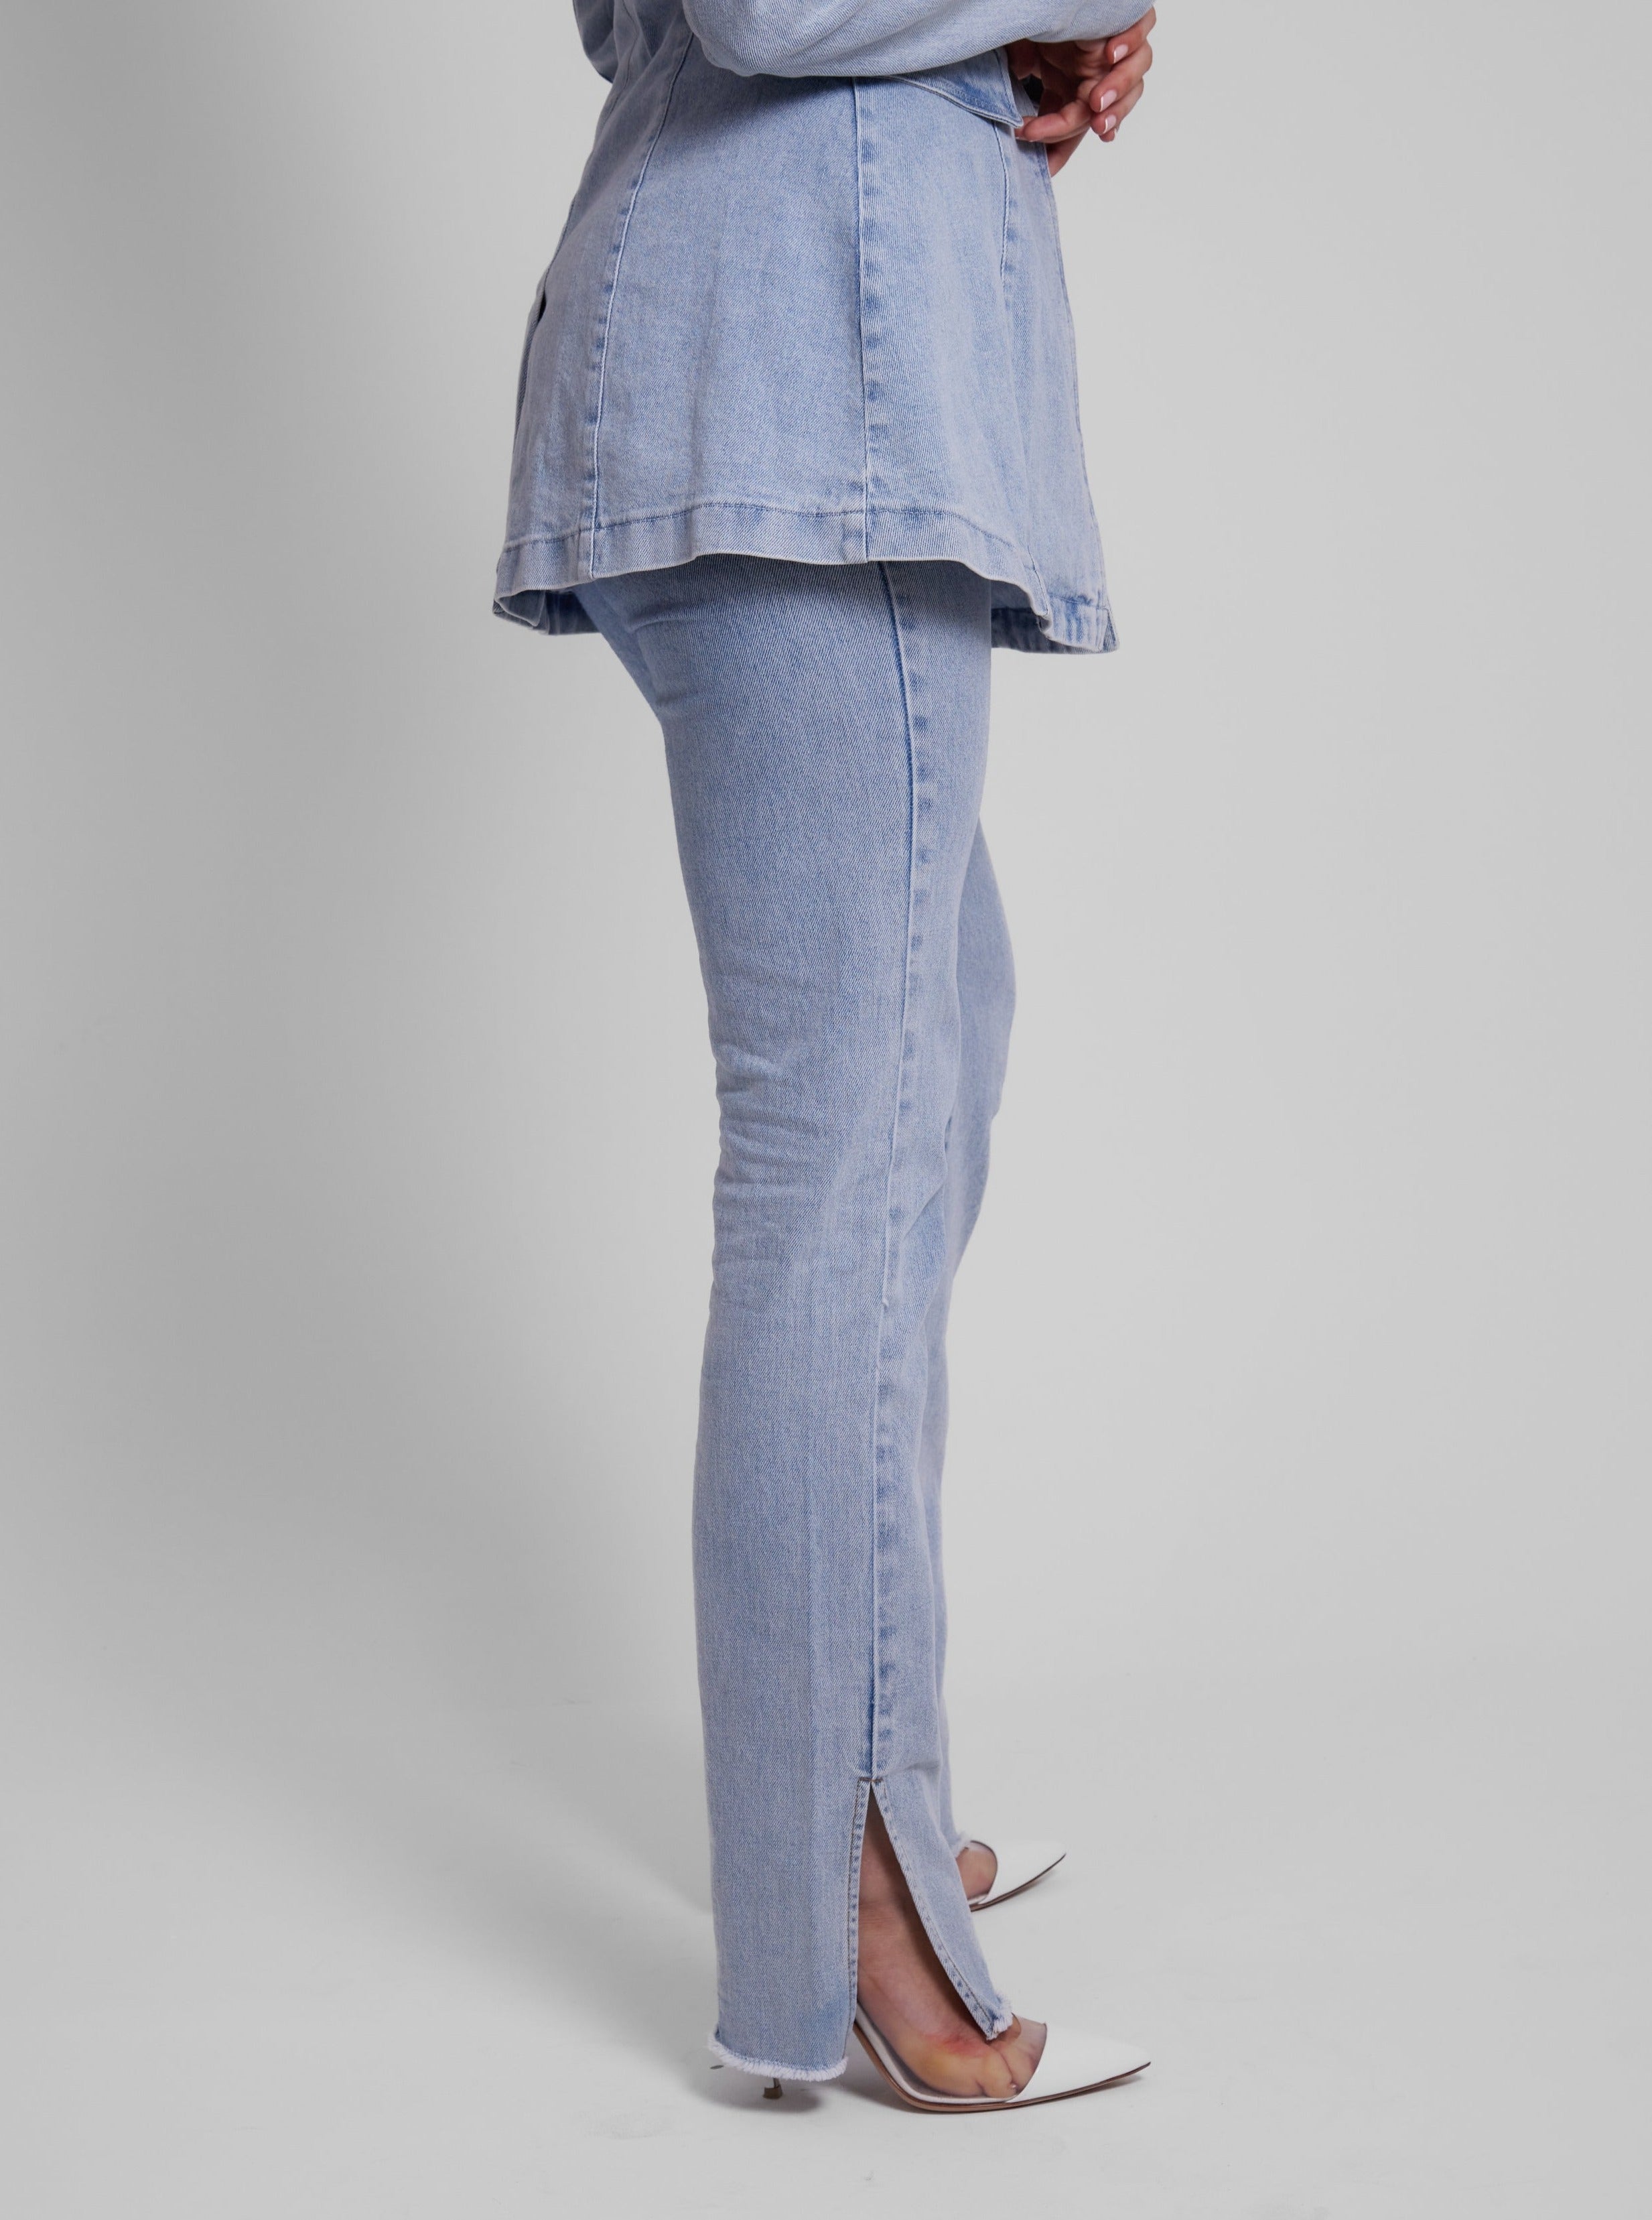 The Ultimate Muse Denim Jeans